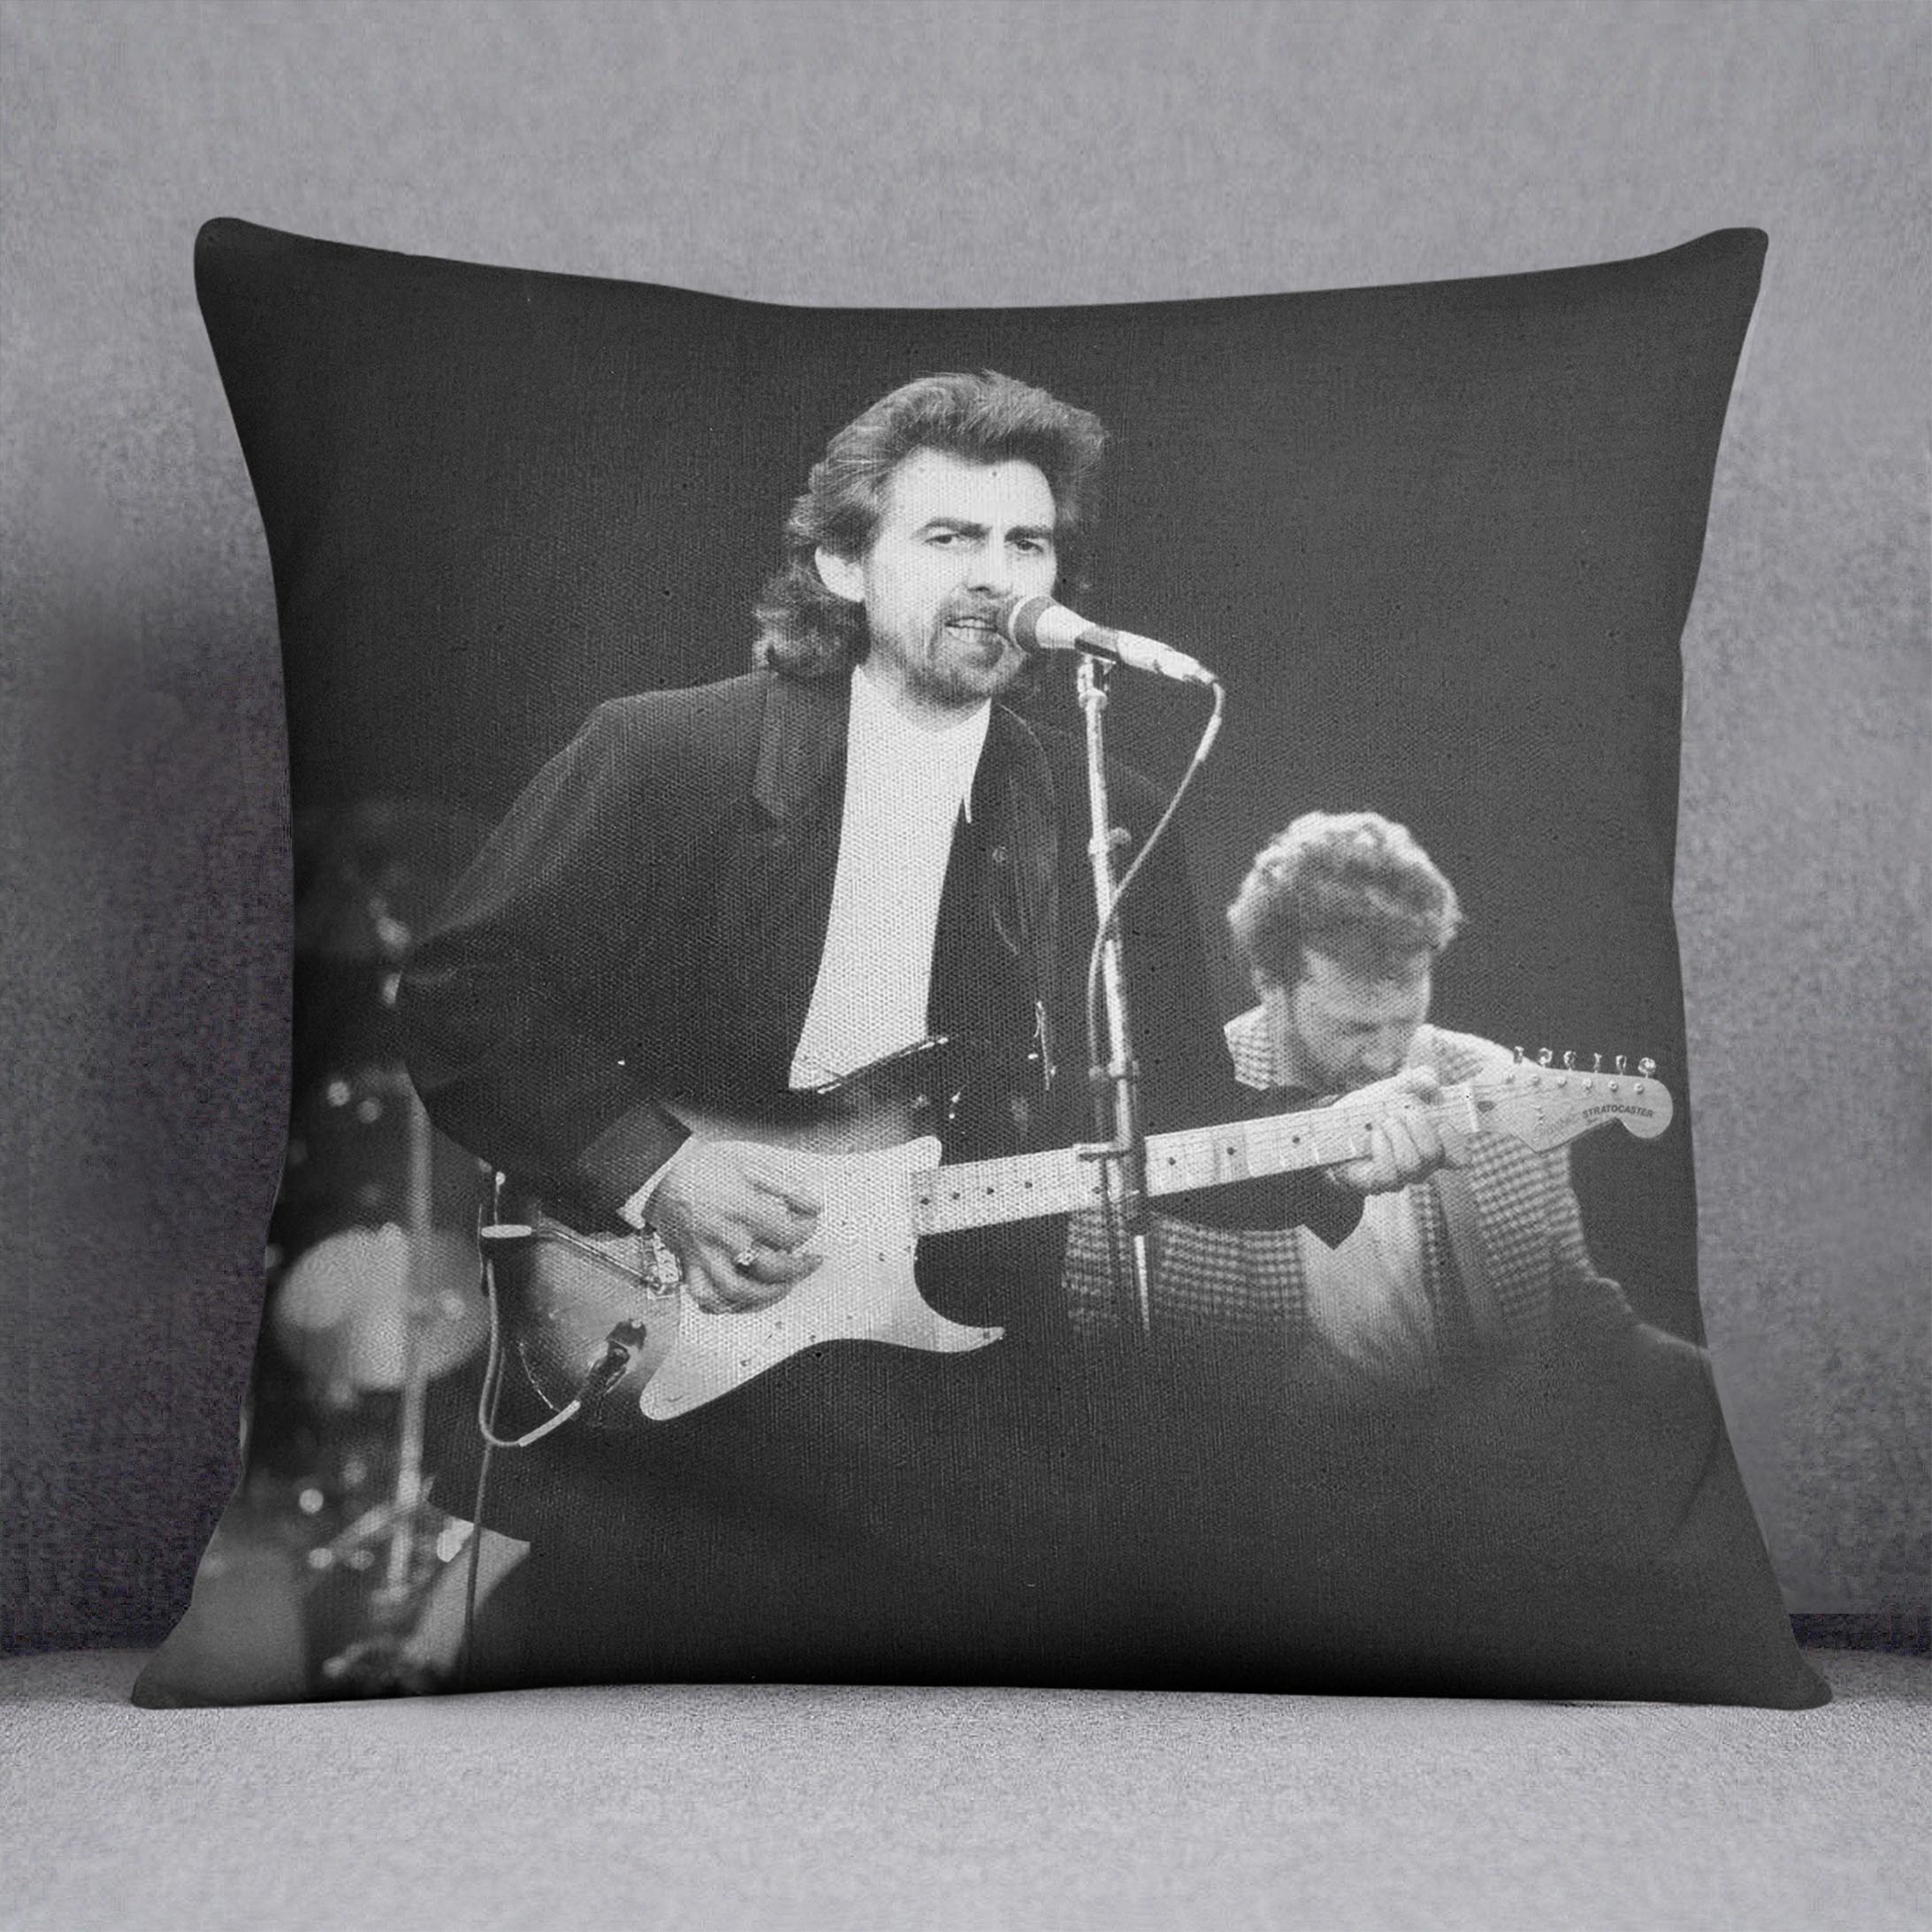 George Harrison at the Princes Trust concert in 1988 Cushion